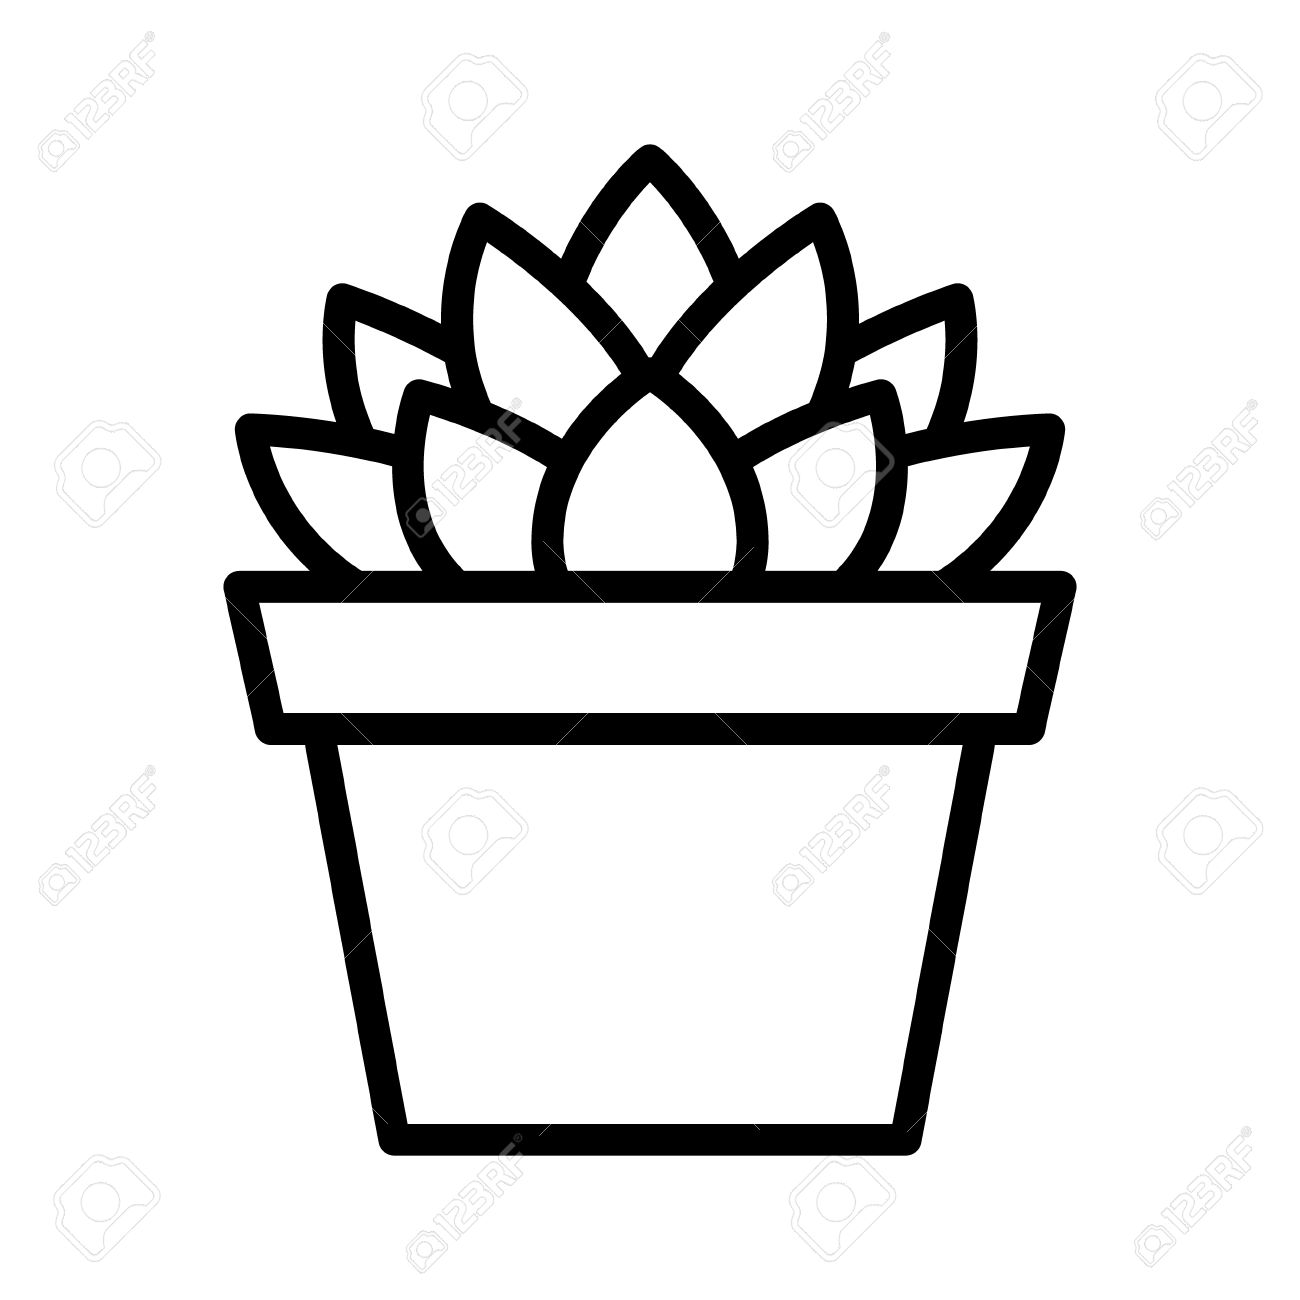 SUCCULENT CLIPART BLACK AND WHITE - 68px Image #6